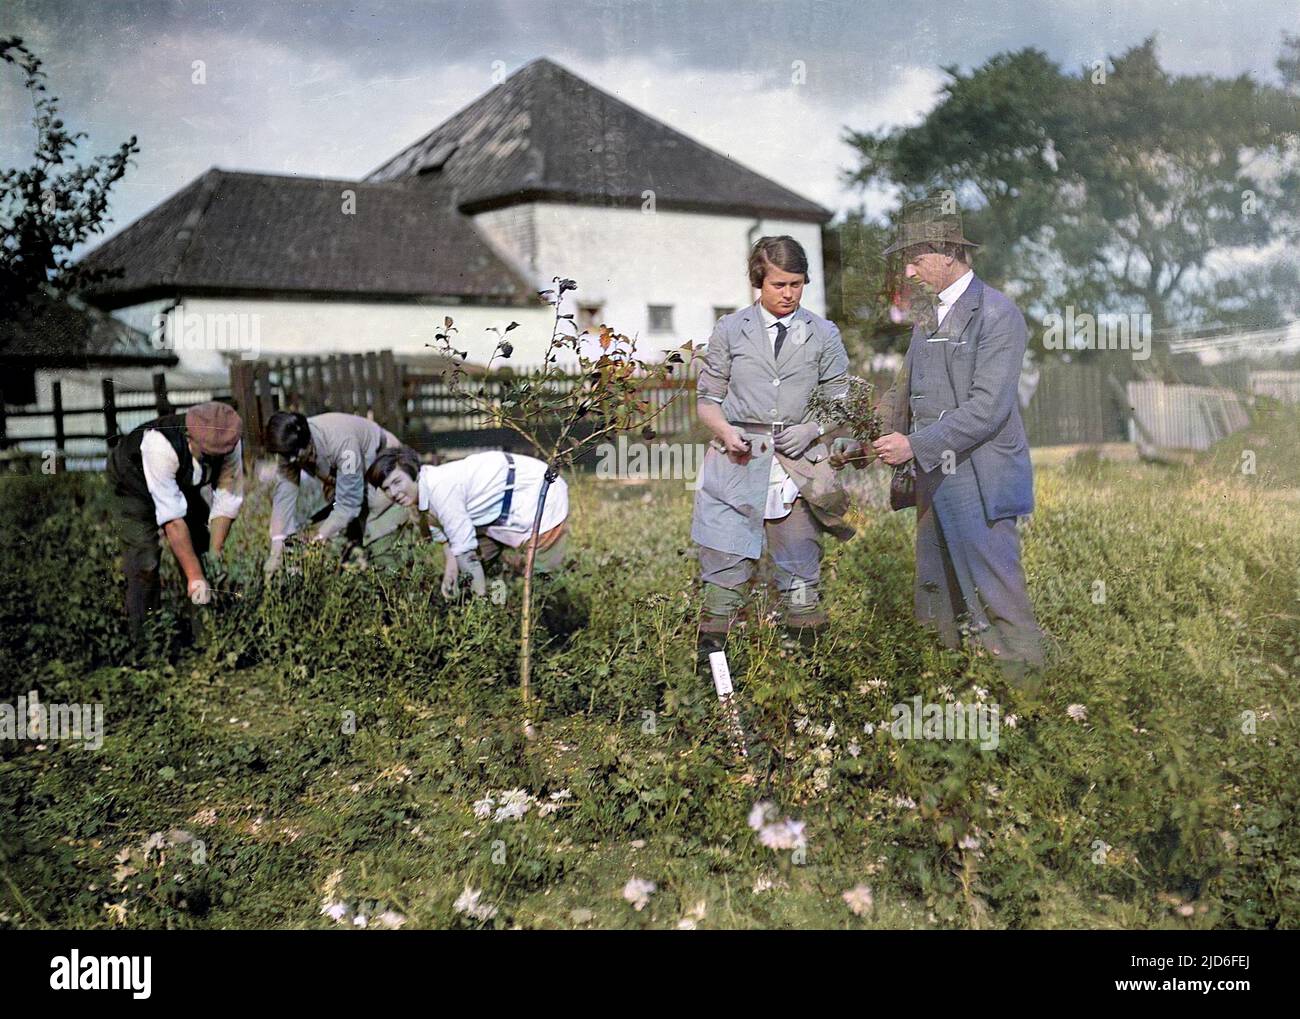 Young women students being taught how to harvest, Swanley Agricultural College, Kent, Engalnd. Colourised version of : 10164552       Date: early 1930s Stock Photo